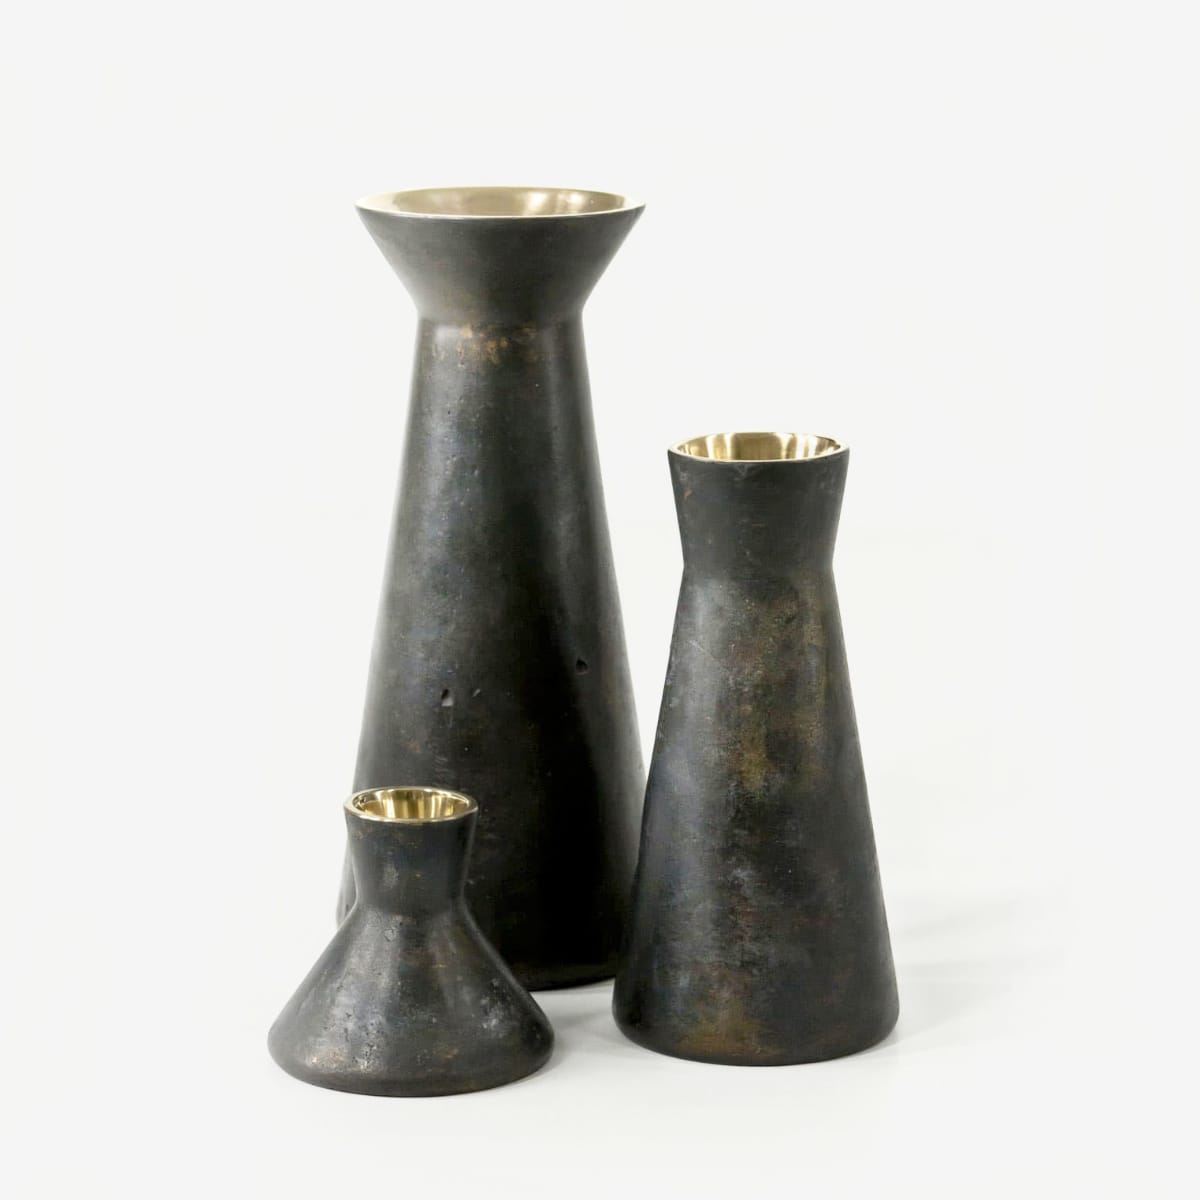 Three Y-01 Vases in three sizes in simple tapered shape with collar on top made of bronze. Inside surface is gold and shiny and outside dark and matt